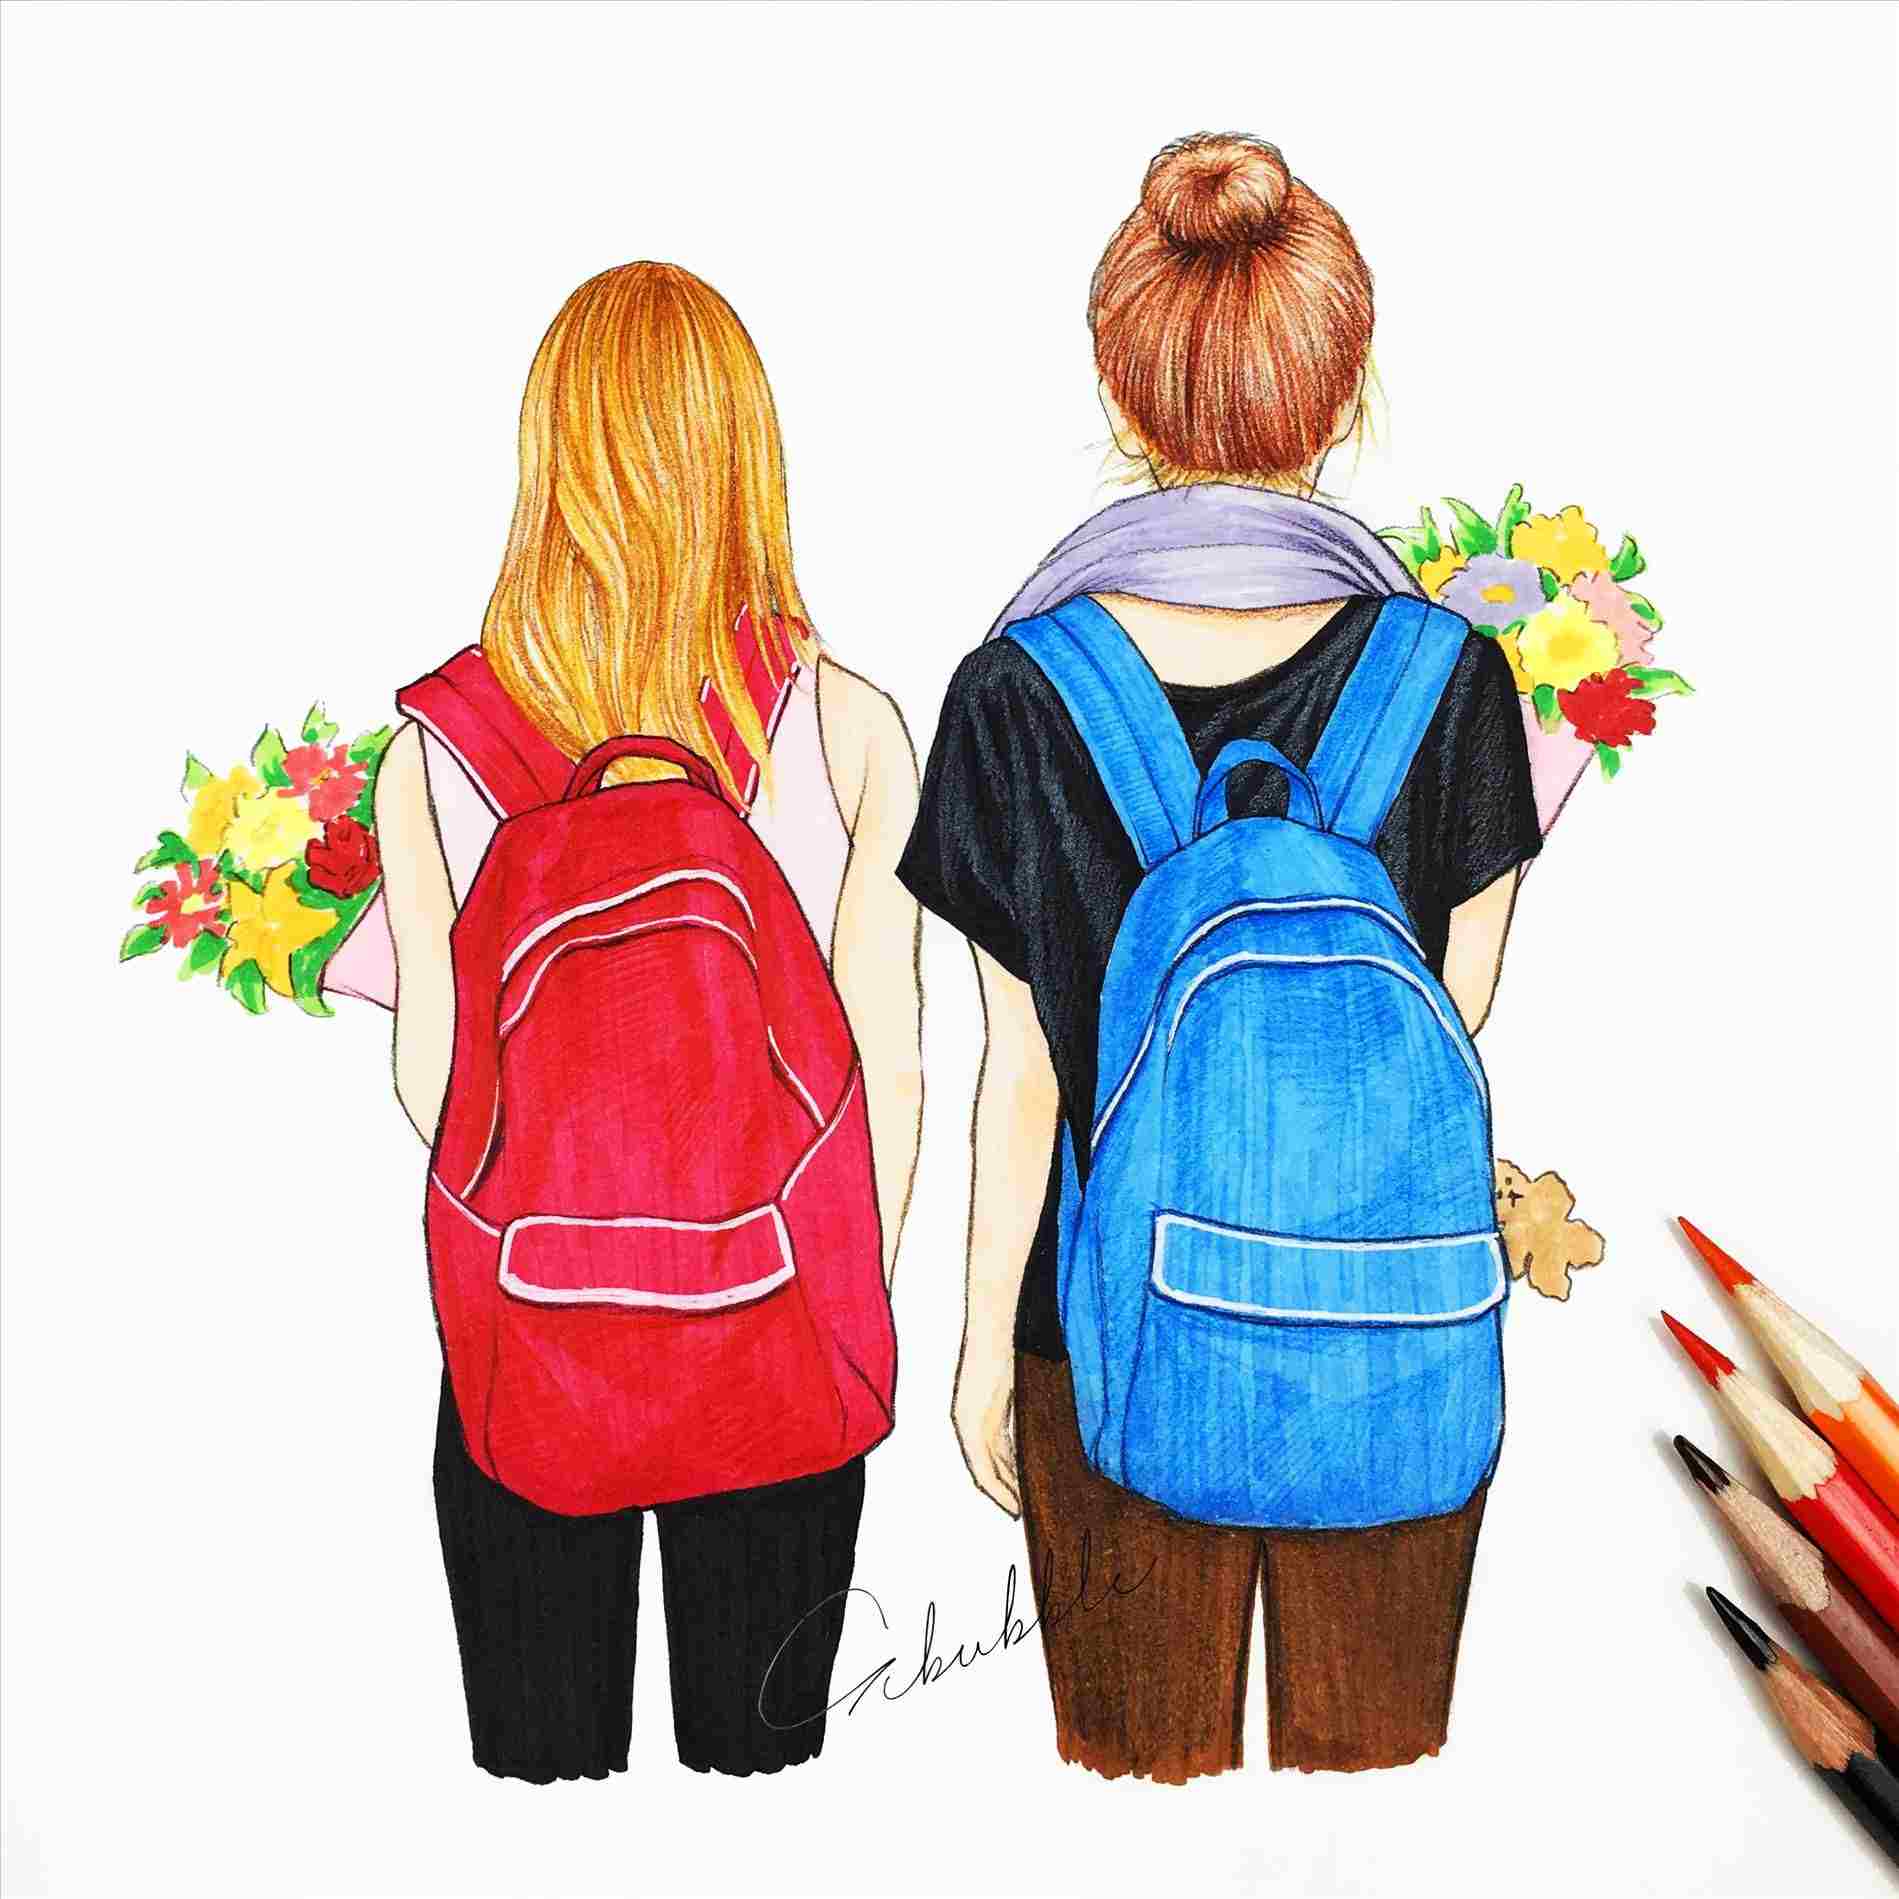 Best Friend Drawings With Colour : Explore lamevamaleta's photos on ...